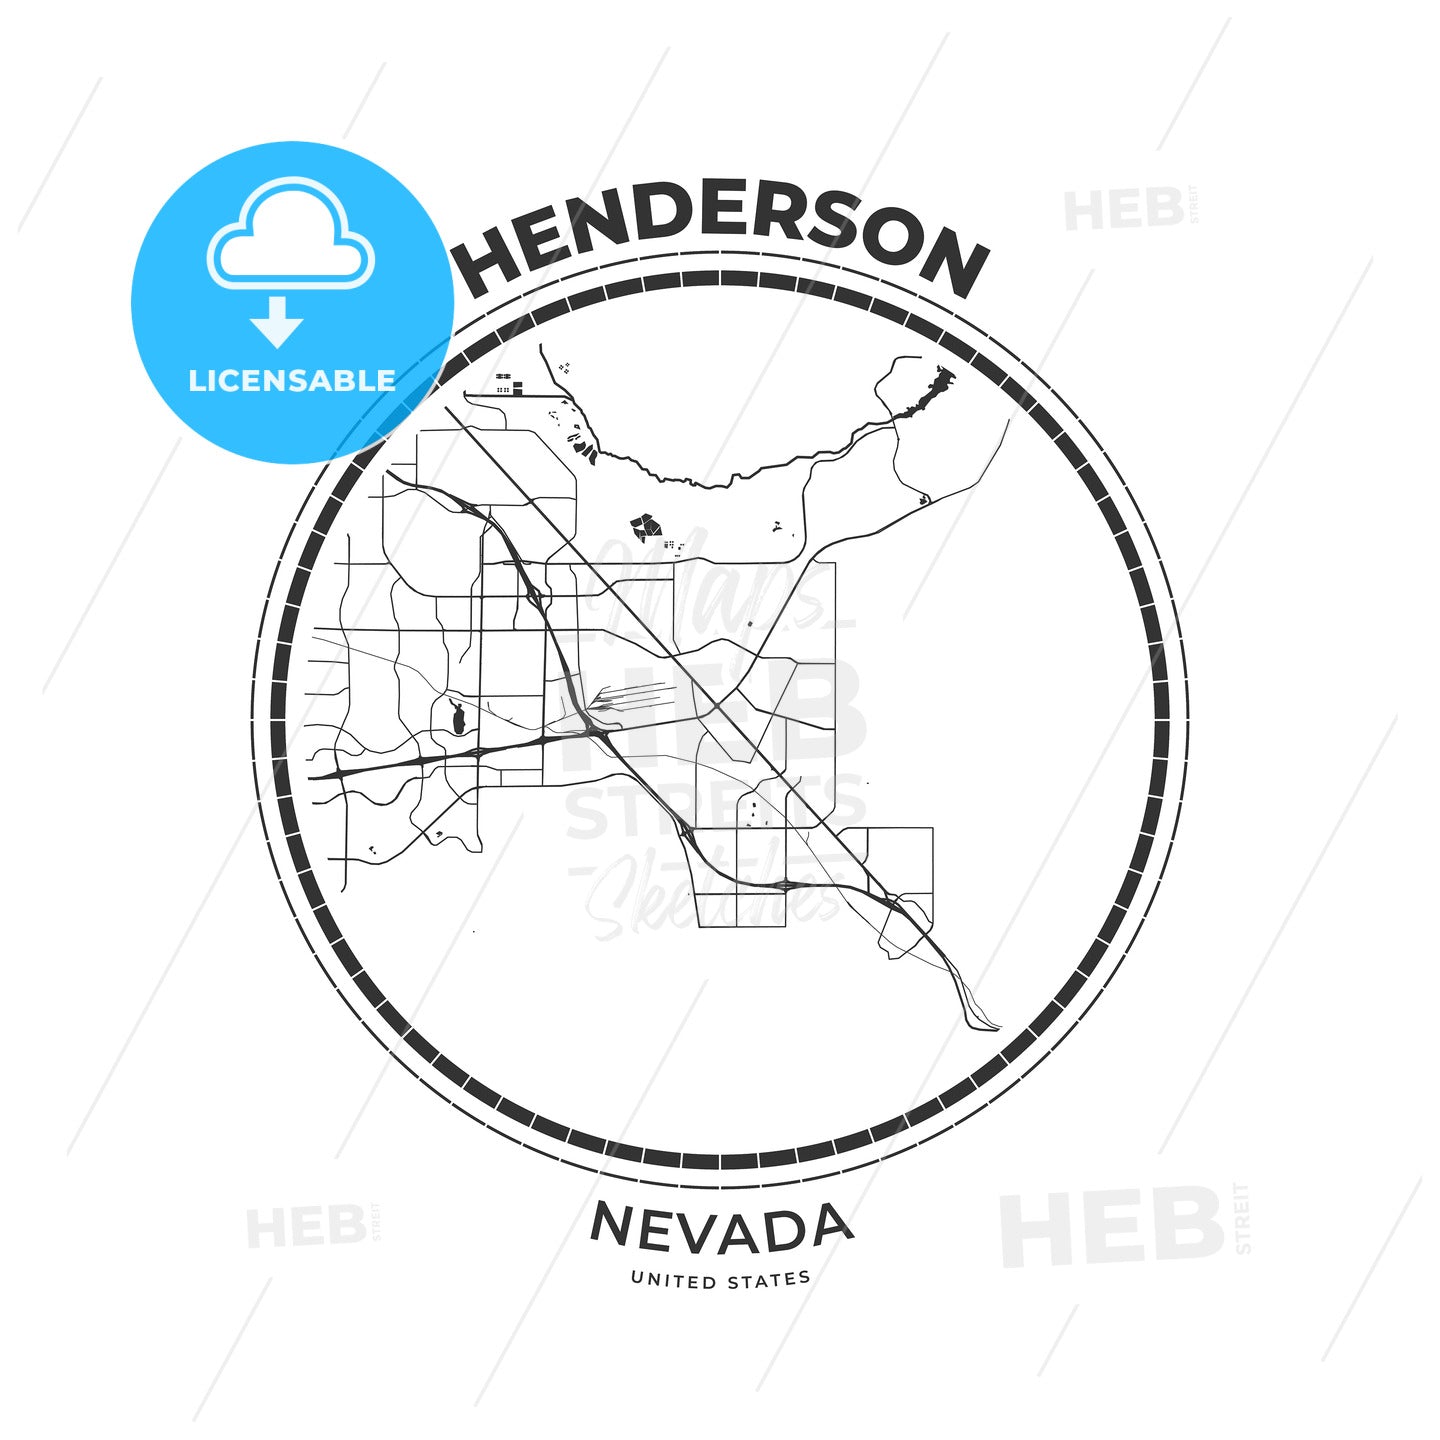 T-shirt map badge of Henderson, Nevada - HEBSTREITS